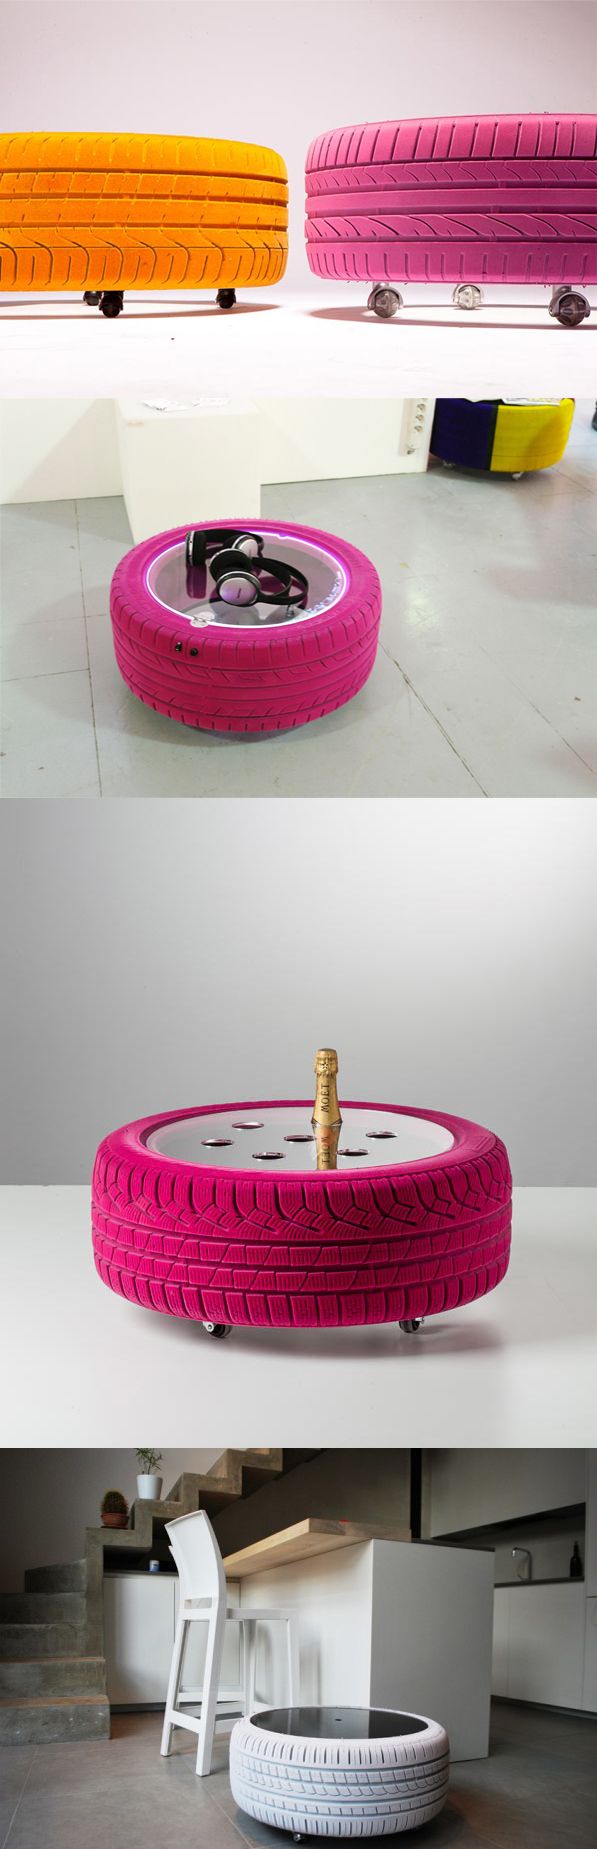 DIY upcycle tired old tires